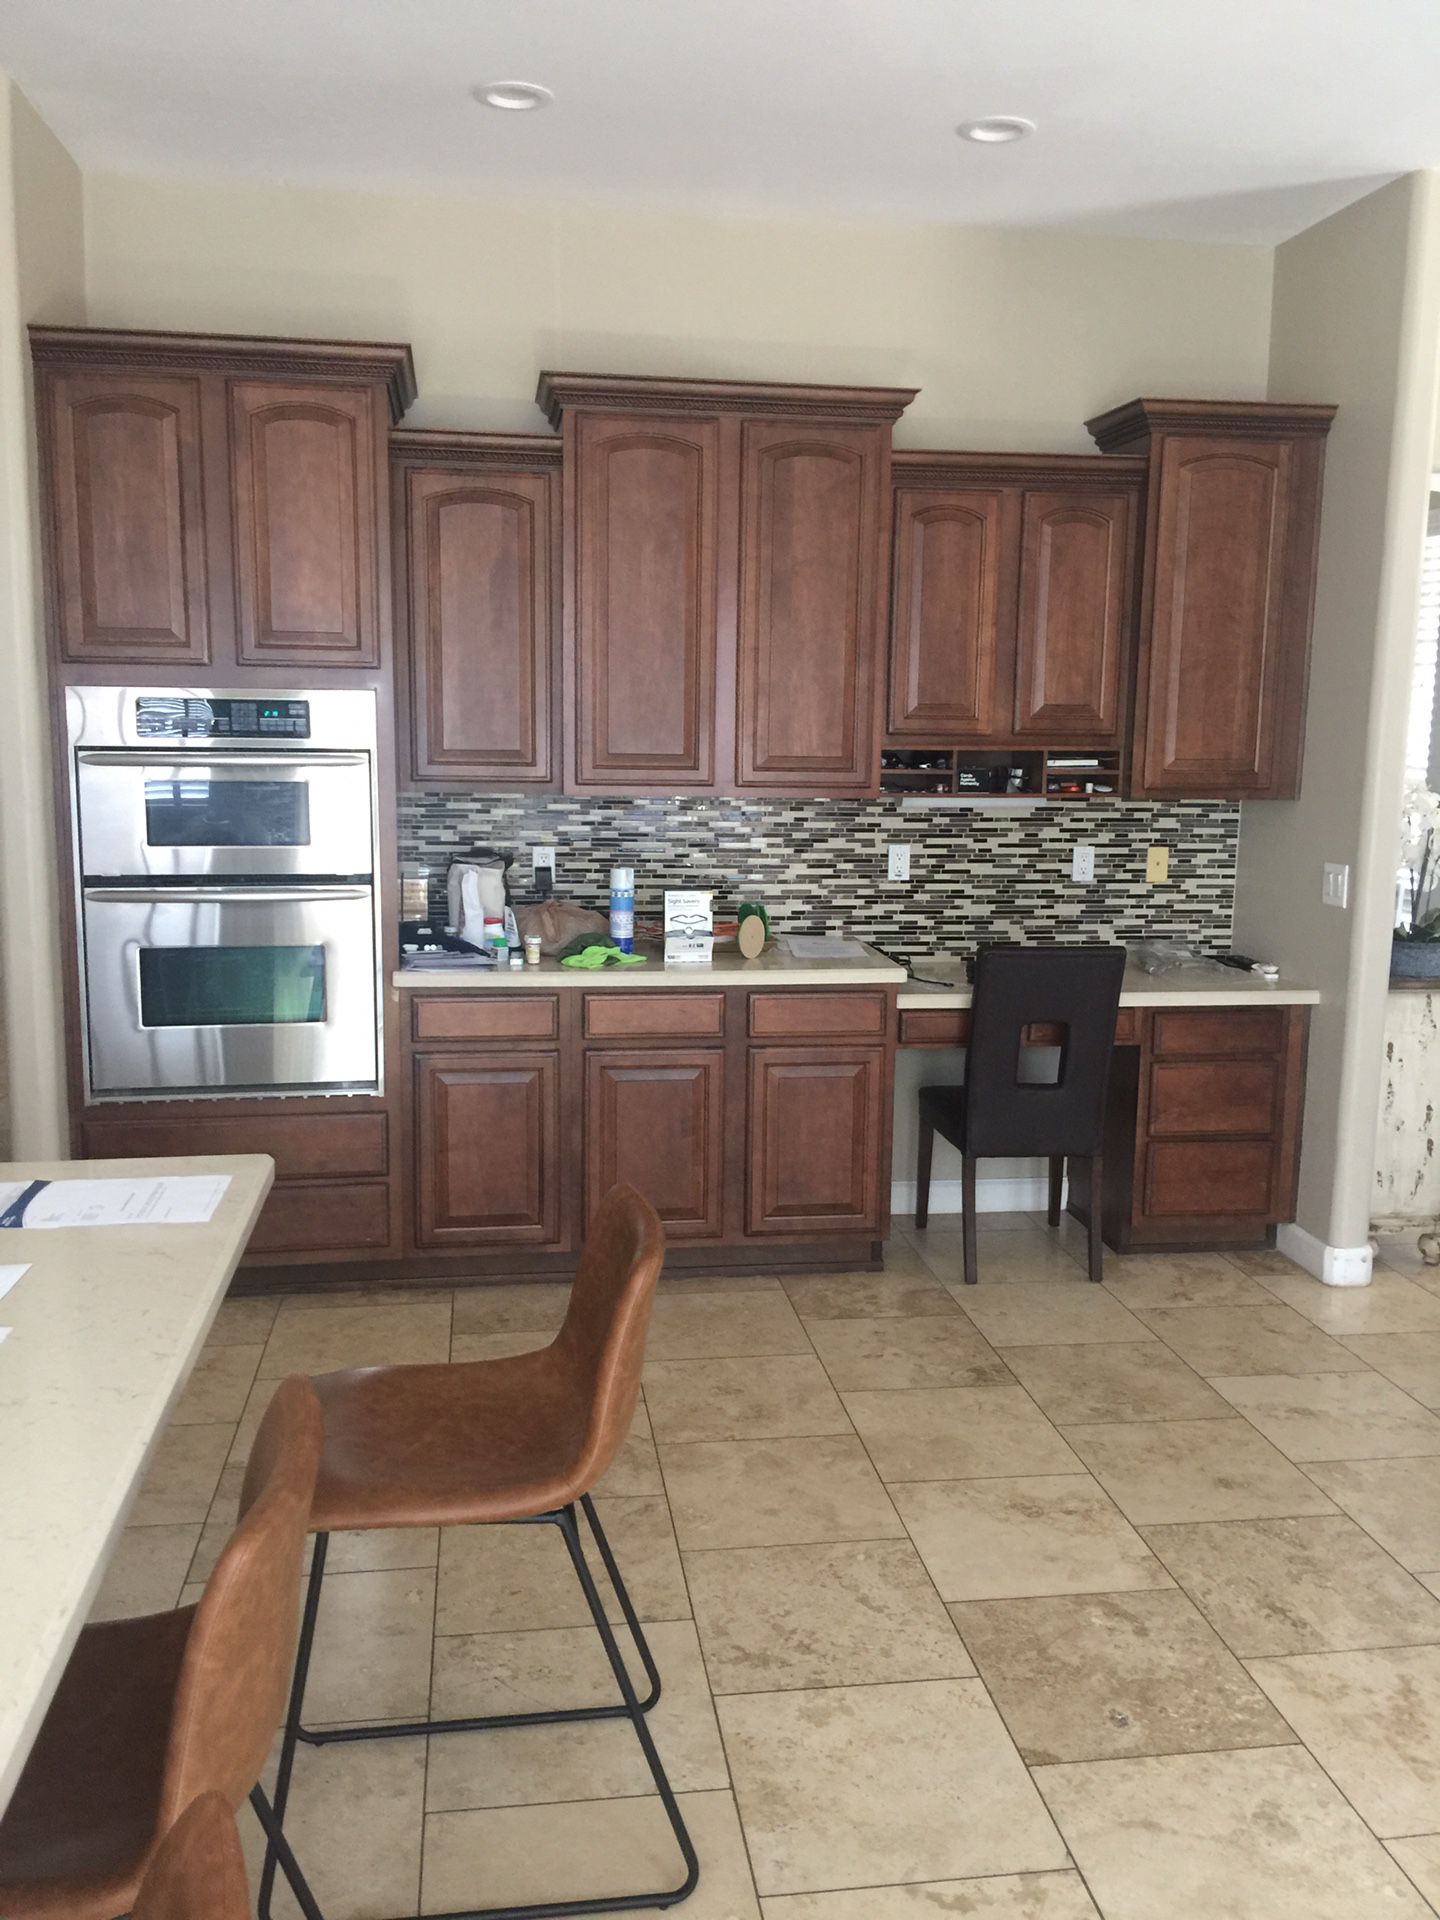 Kitchen laundry and bathroom cabinets only and countertops for sale